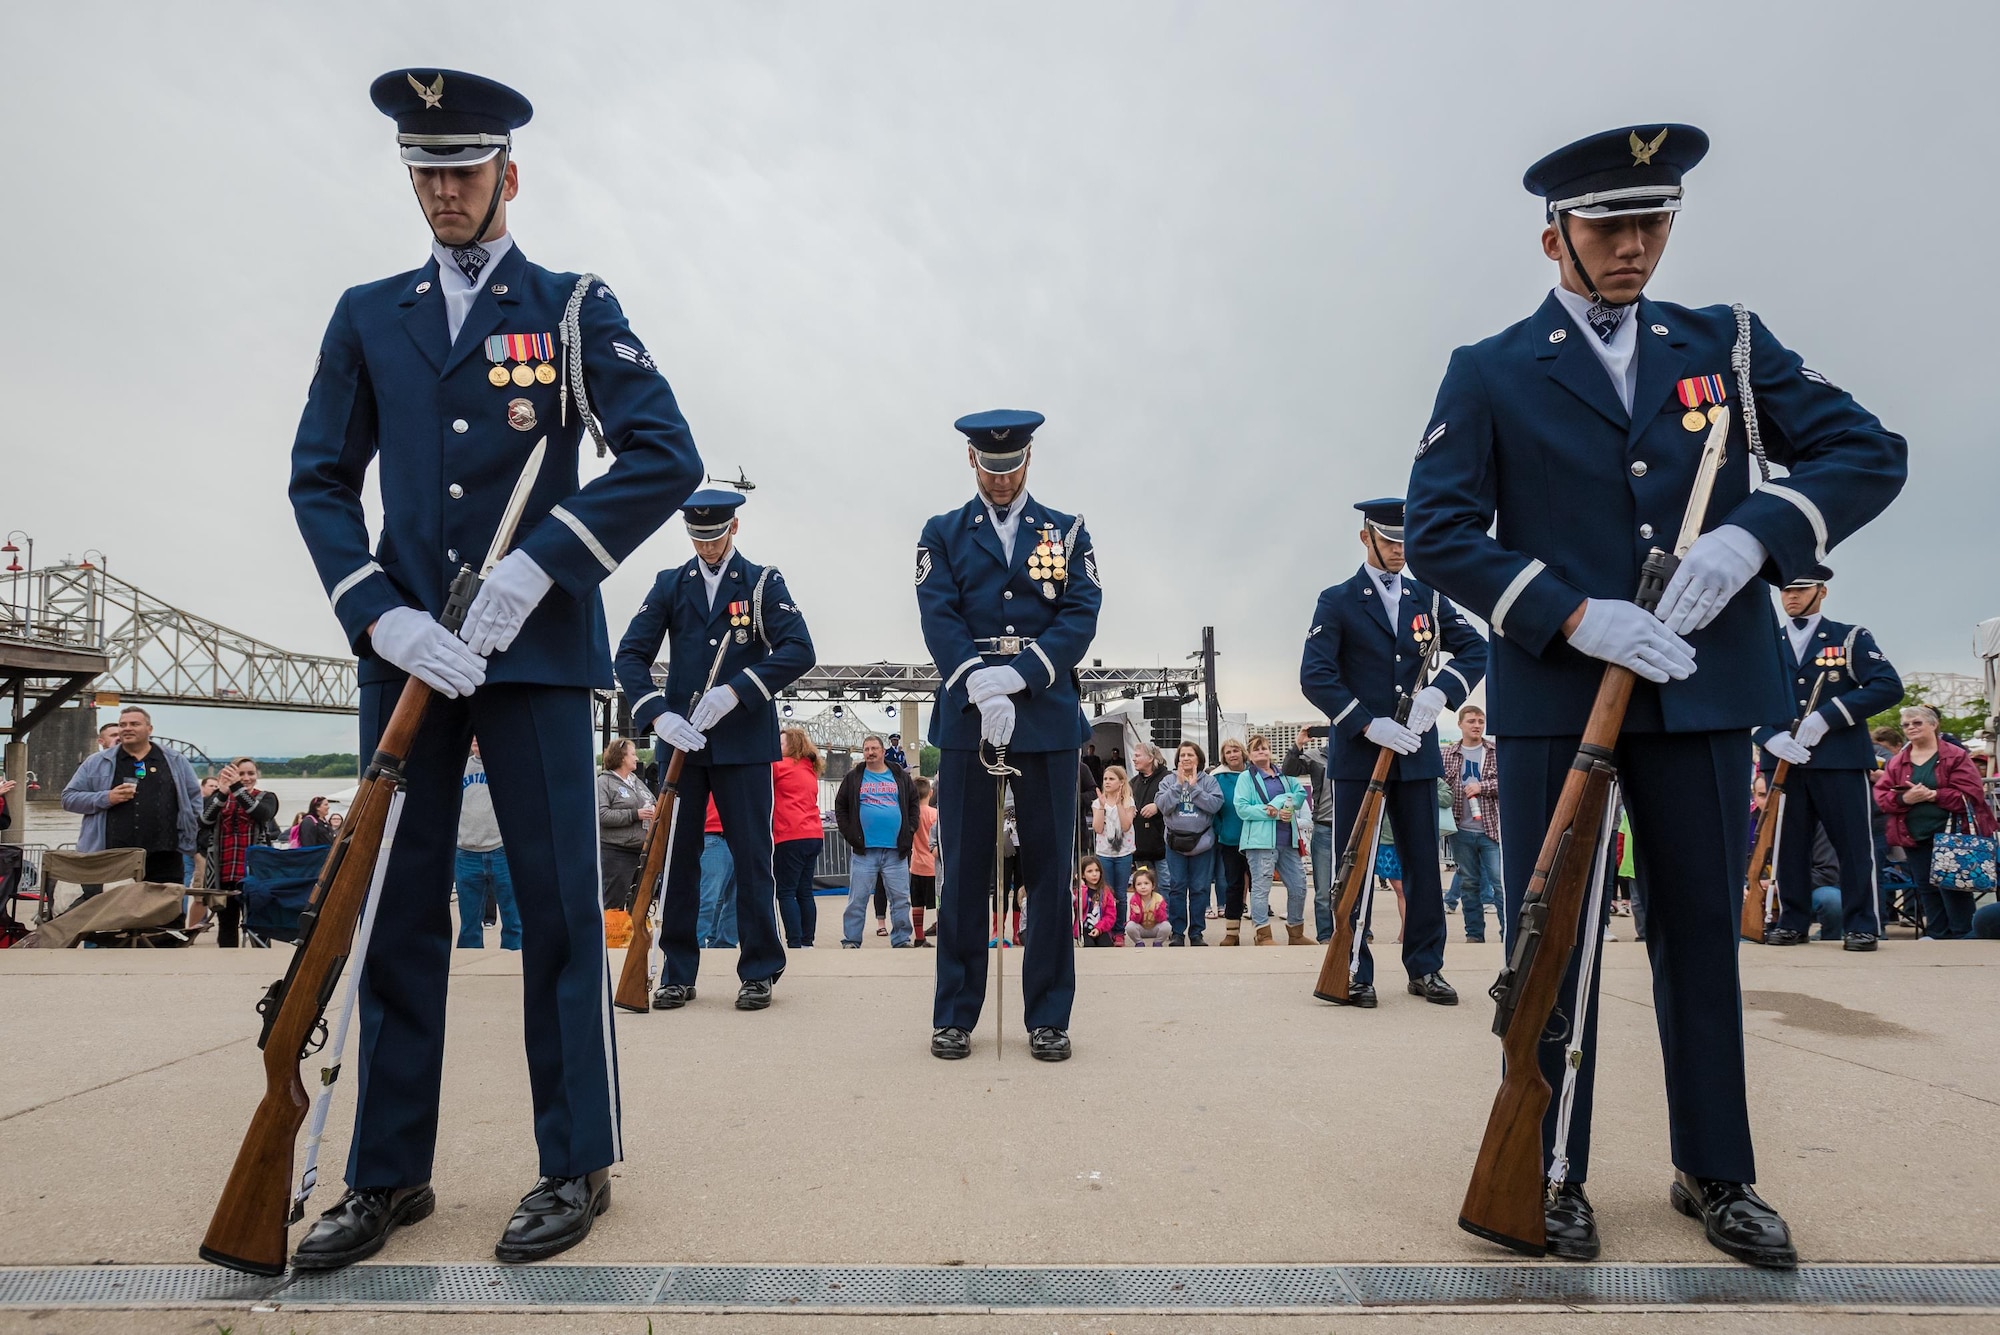 Members of the U.S. Air Force Honor Guard execute a precision rifle drill before an appreciative crowd at Waterfront Park in downtown Louisville, Ky., May 3, 2017, as part of the Kentucky Derby Festival. The Airmen, from Joint Base Anacostia-Bolling in Washington, D.C., strive to represent the Air Force Core Values of integrity, service and excellence through precise drill movements, immaculate appearance and extreme attention to detail. (U.S. Air National Guard photo by Lt. Col. Dale Greer)